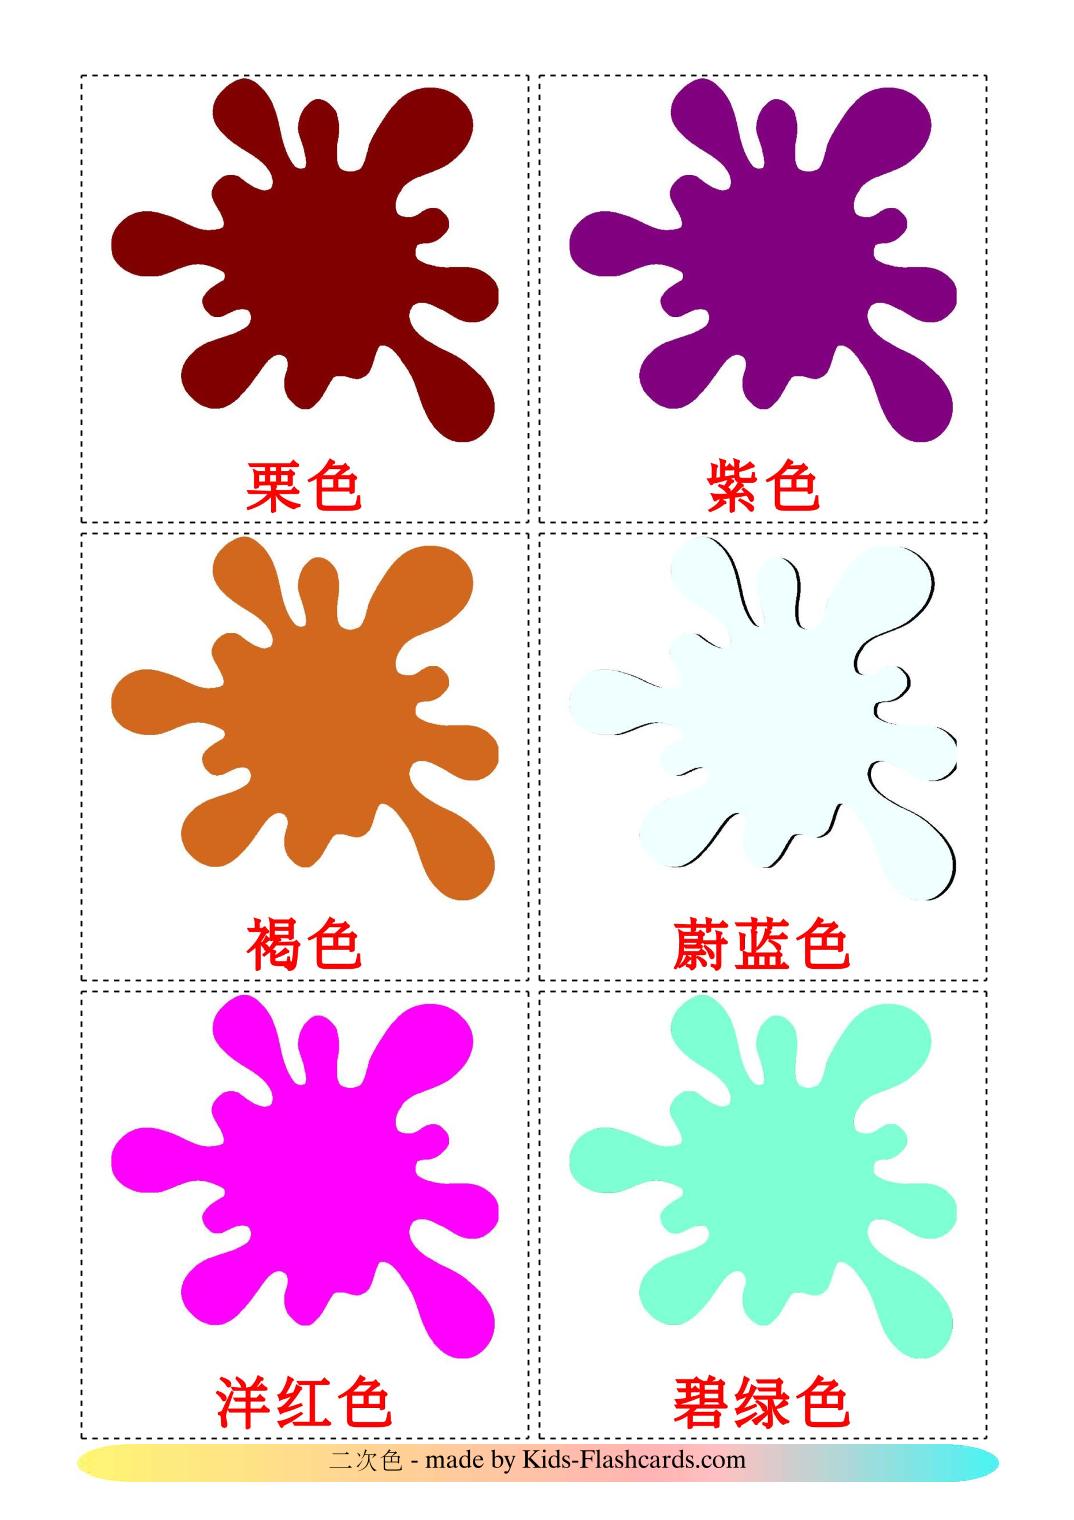 Secondary colors - 20 Free Printable chinese(Simplified) Flashcards 